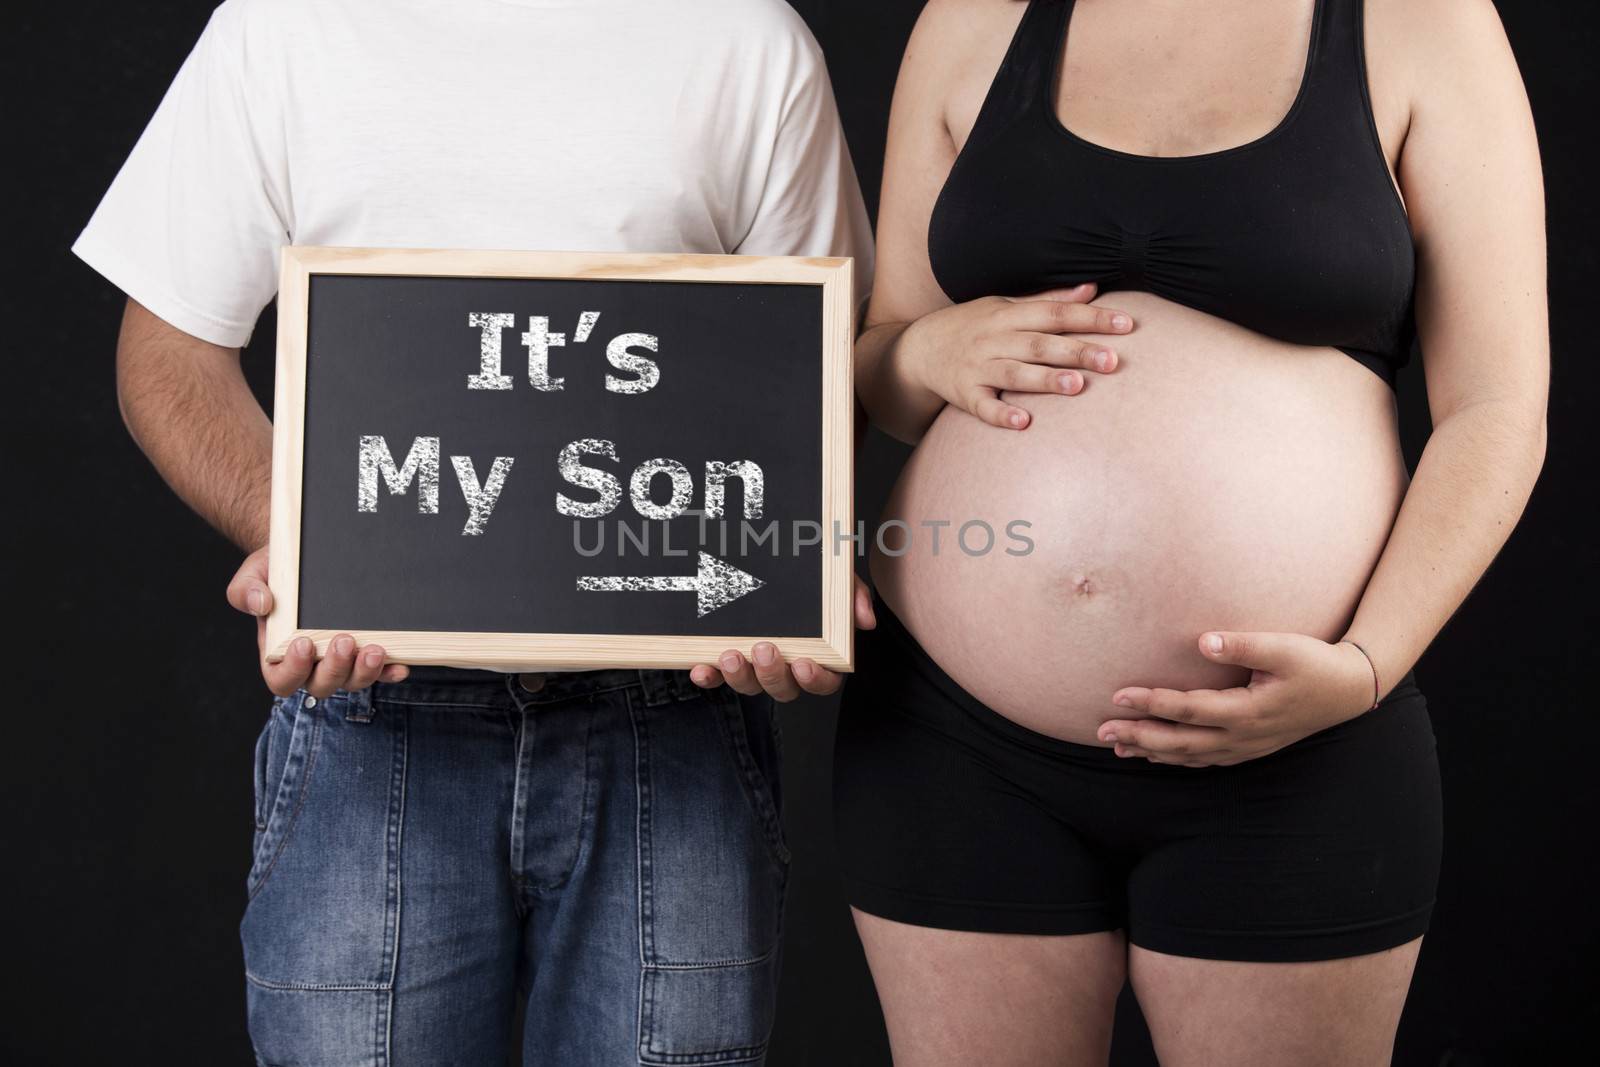 Dad holding a chalkboard with the words "It's my Son" and pointing to mom's belly